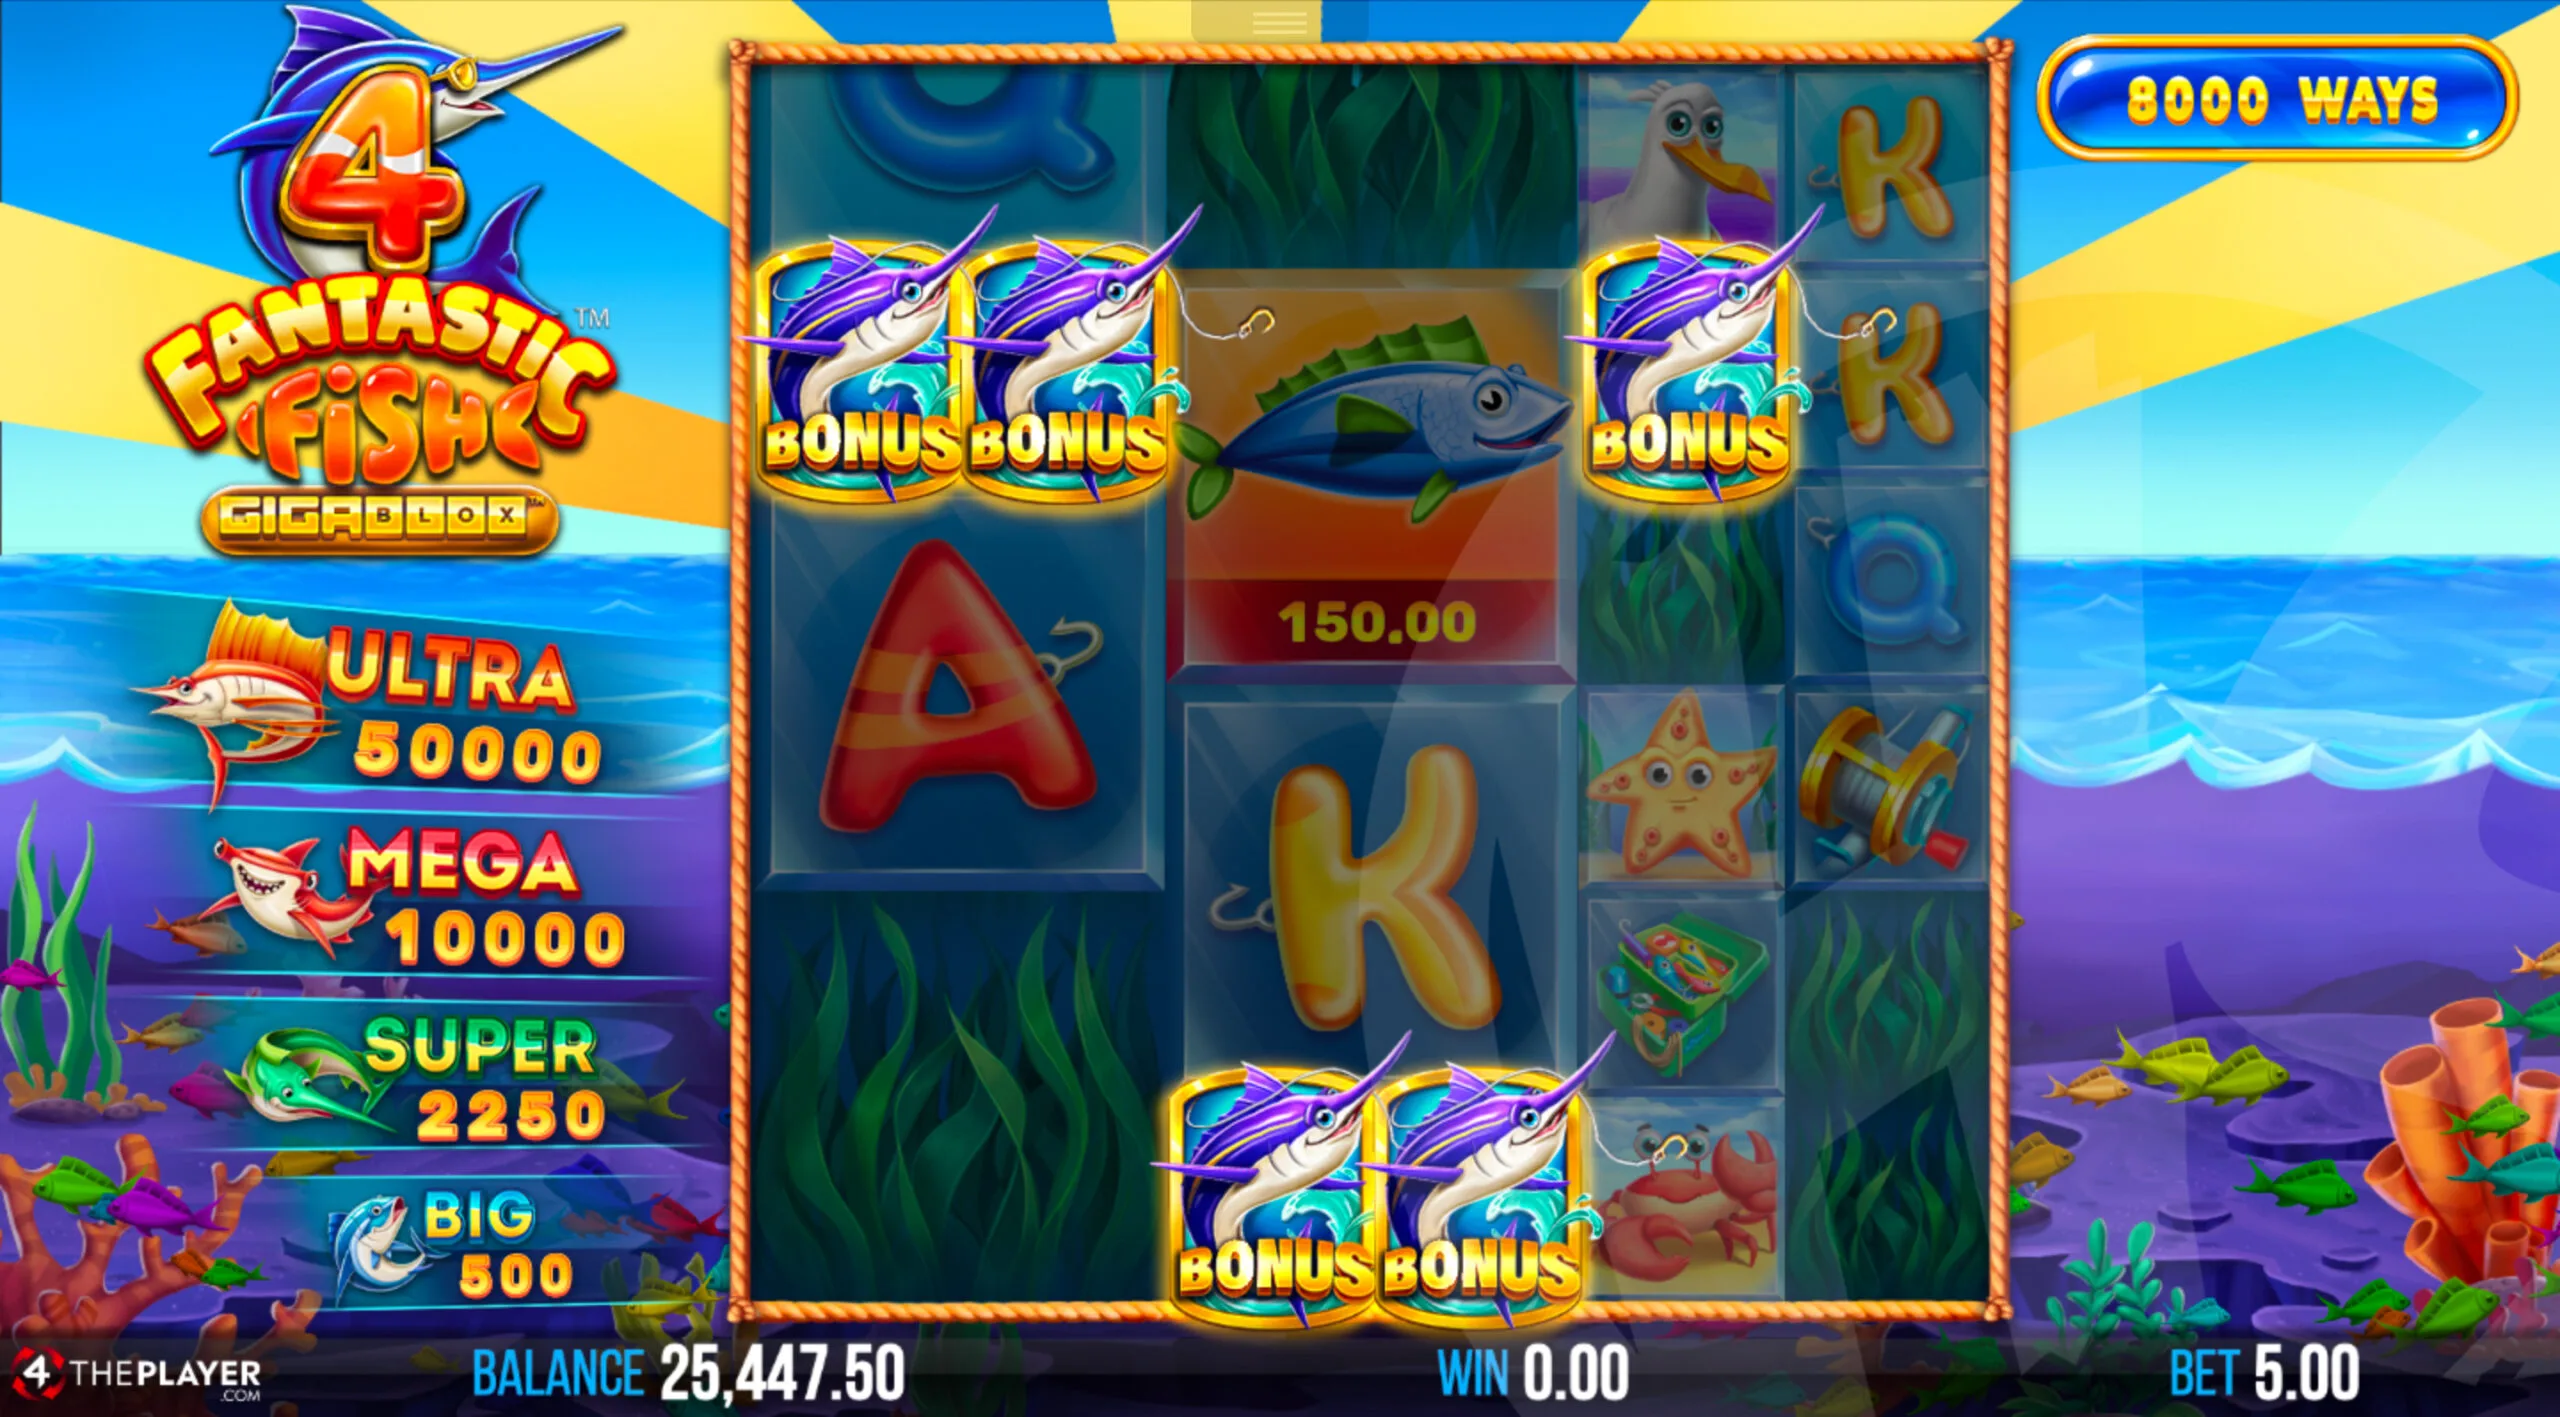 Land 3 or More Respin Scatters to Trigger the Fishing Respins Bonus